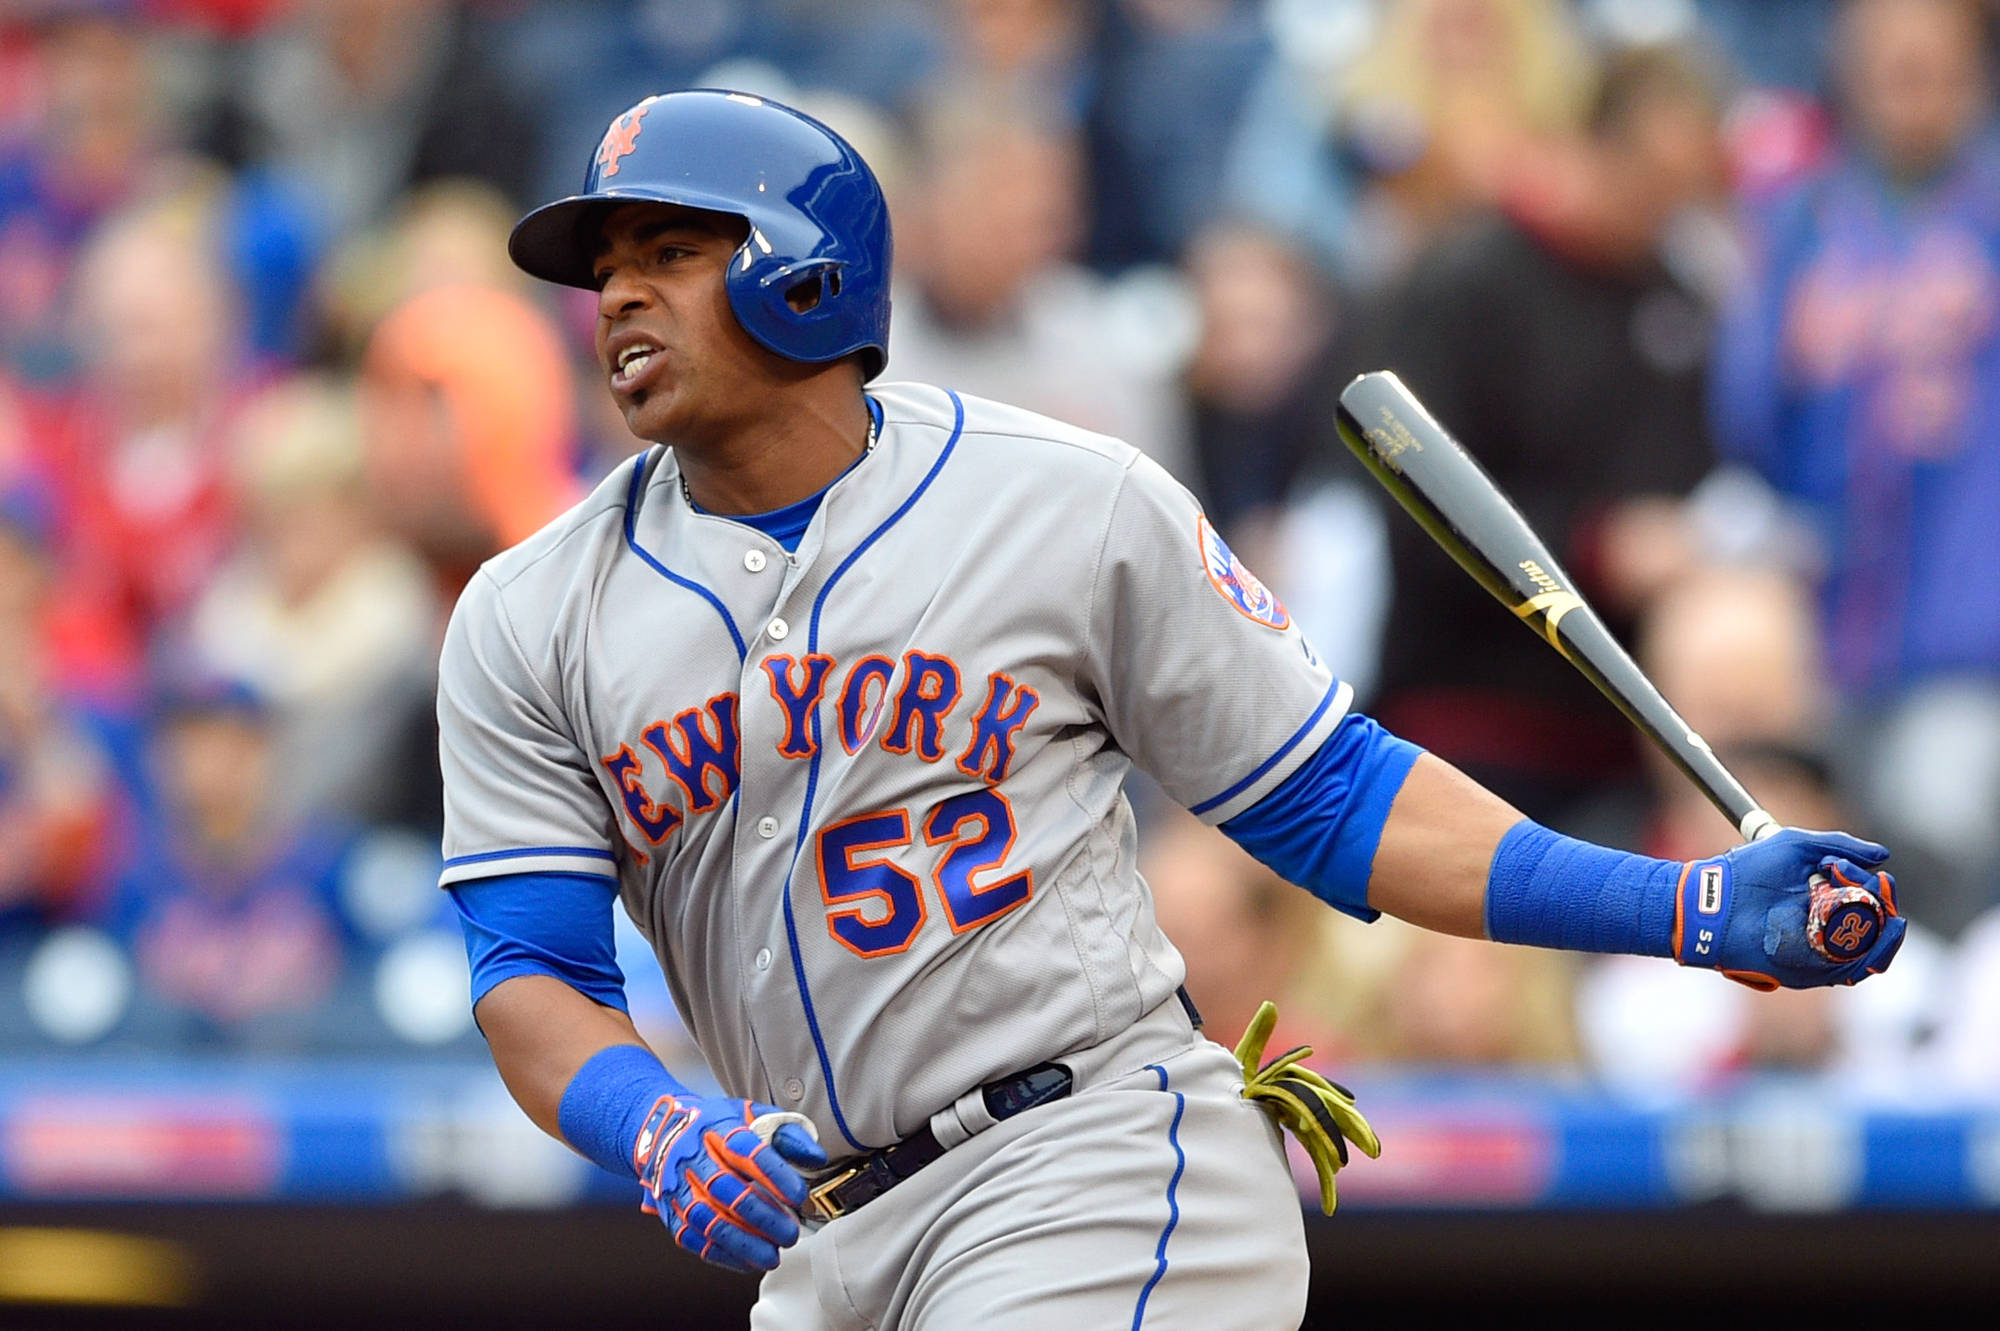 Where Will Yo Go? The Possible Landing Spots for Yoenis Cespedes